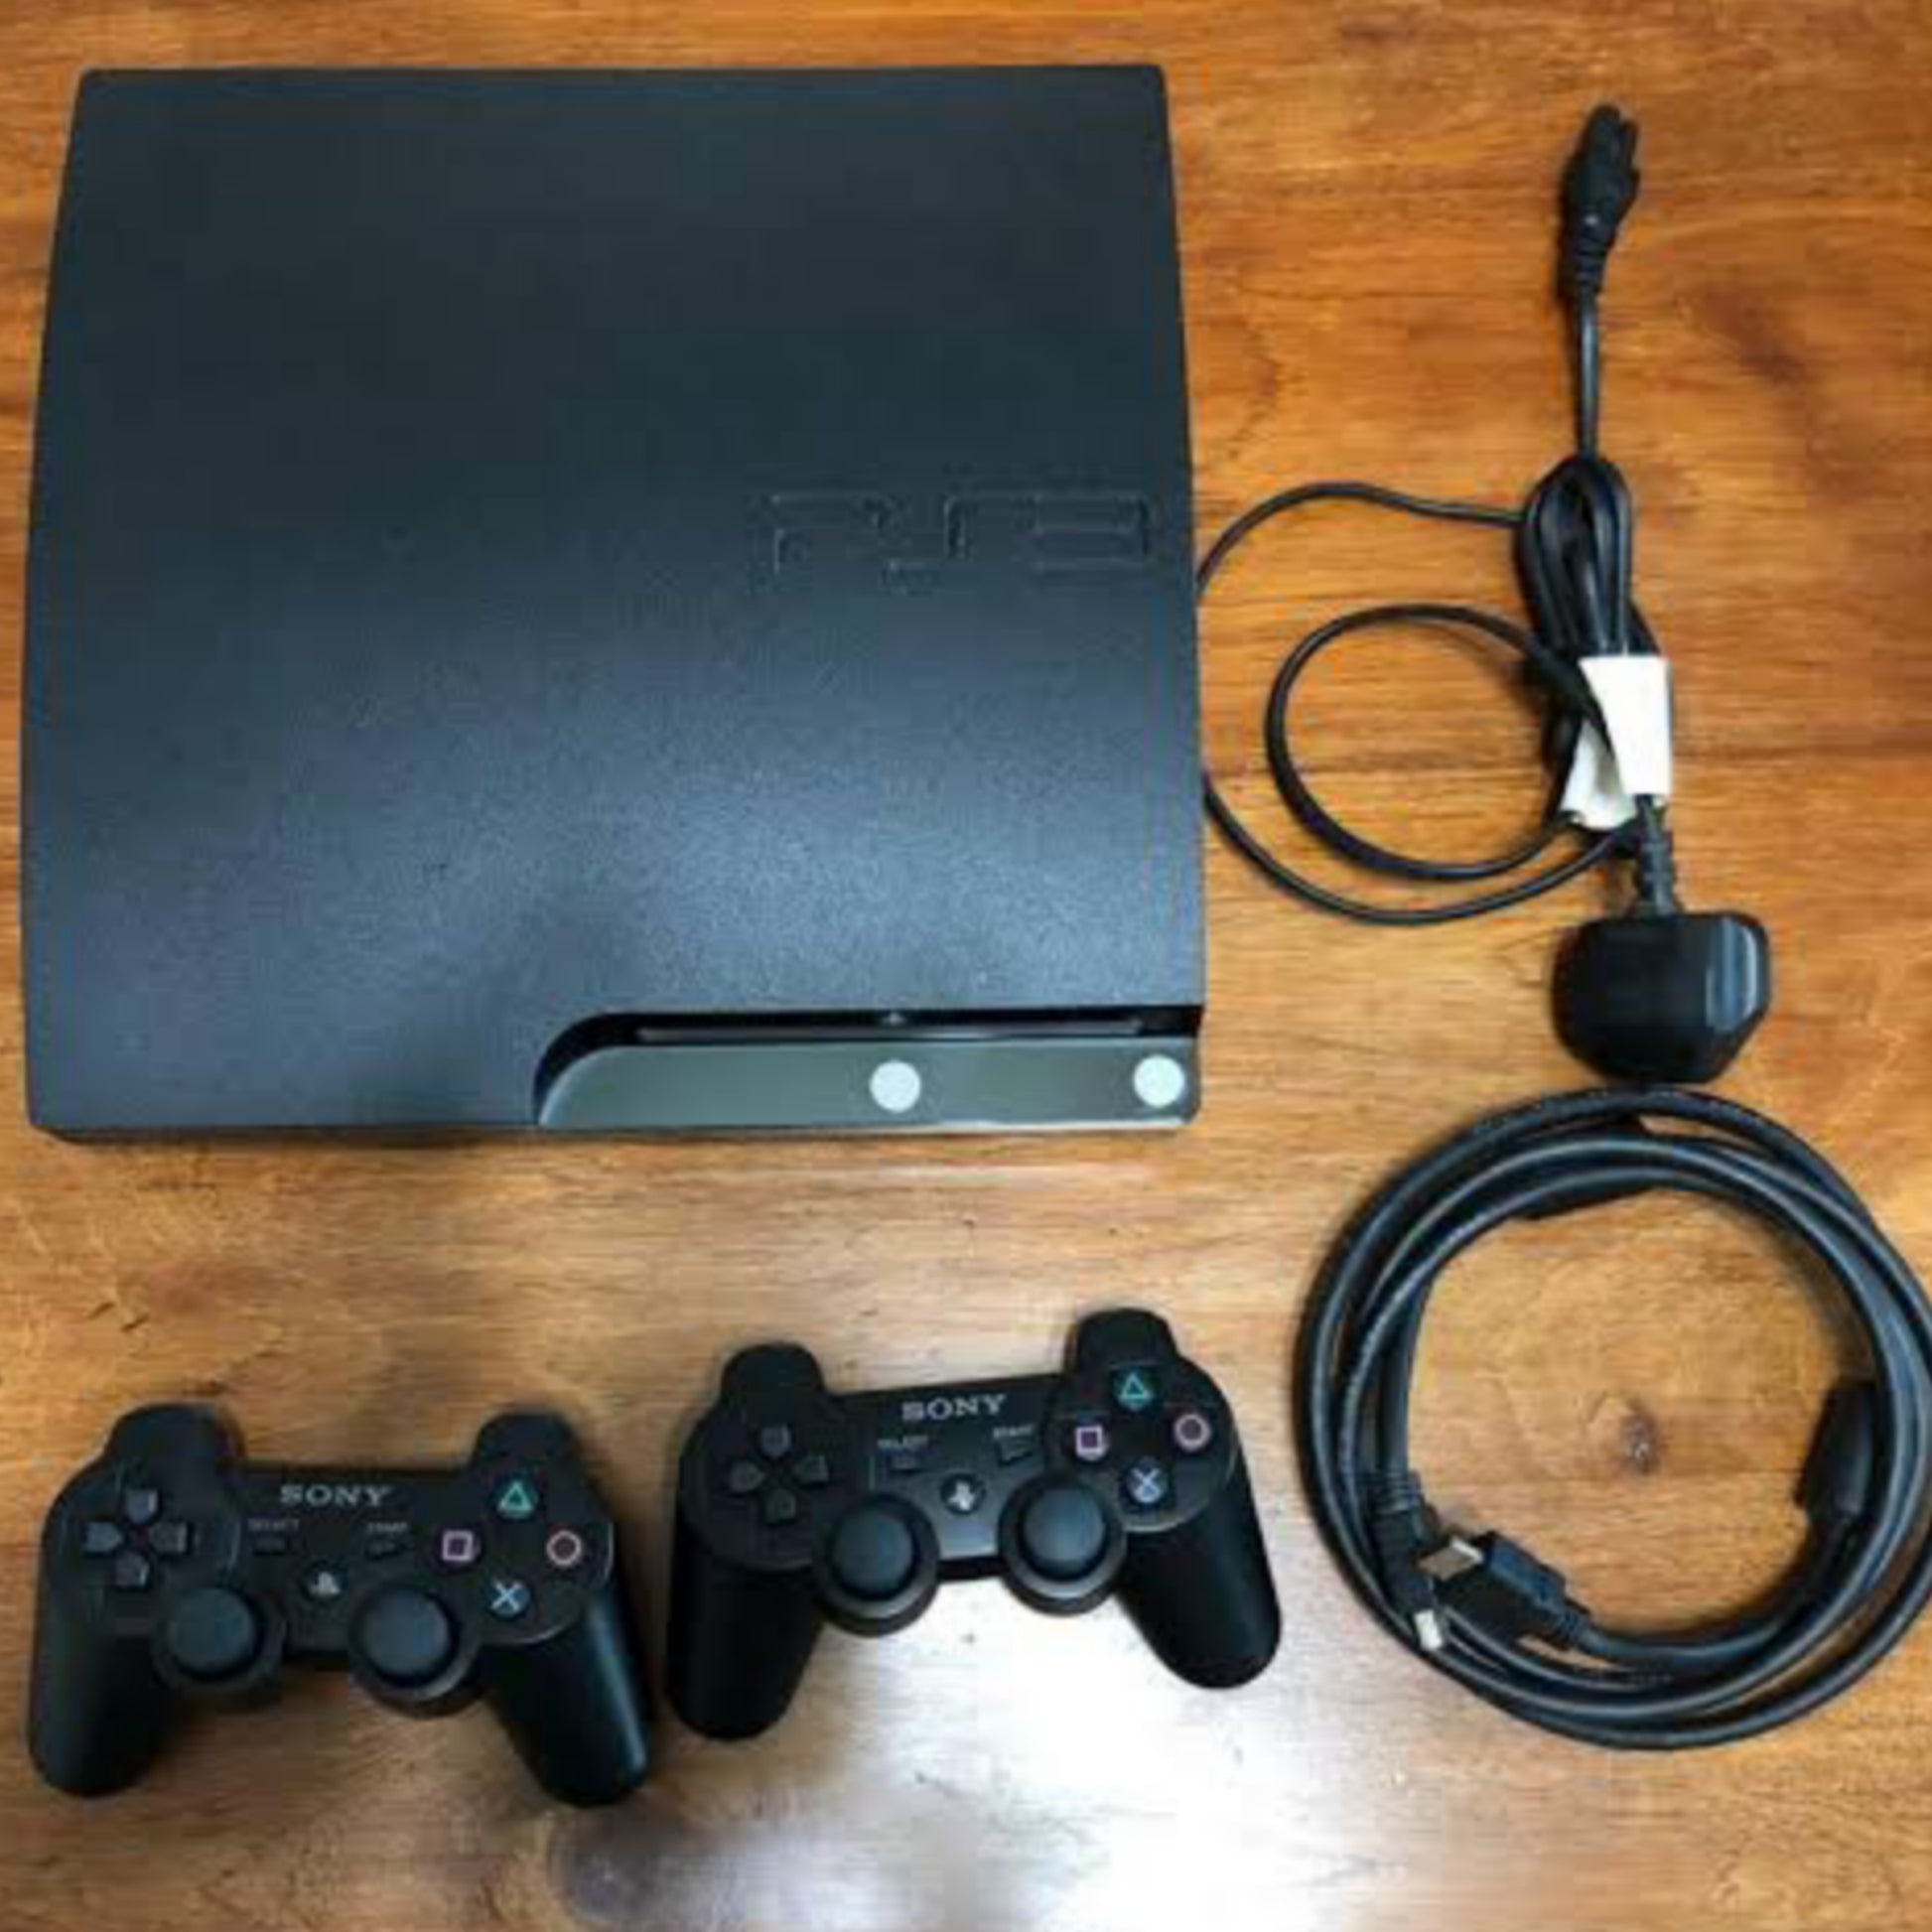 UK Used PS3 (Playstation 3) Slim 320GB Game Console Complete Set + Extra Game Controller & 20 Titles